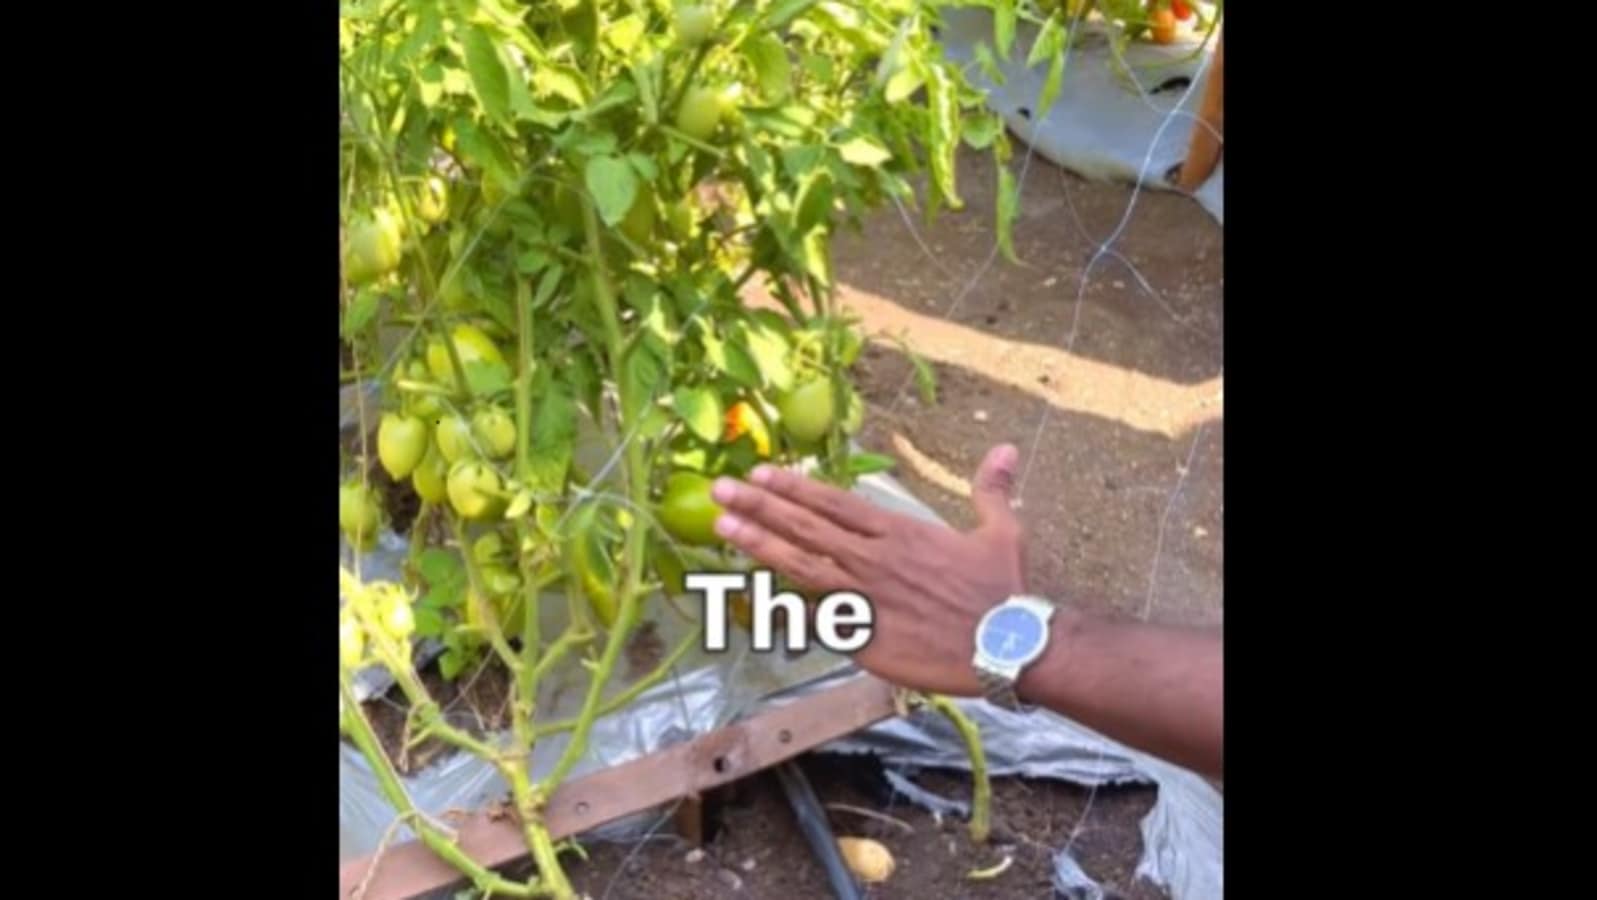 Man grows potato and tomato in one plant, people have mixed reactions. Watch